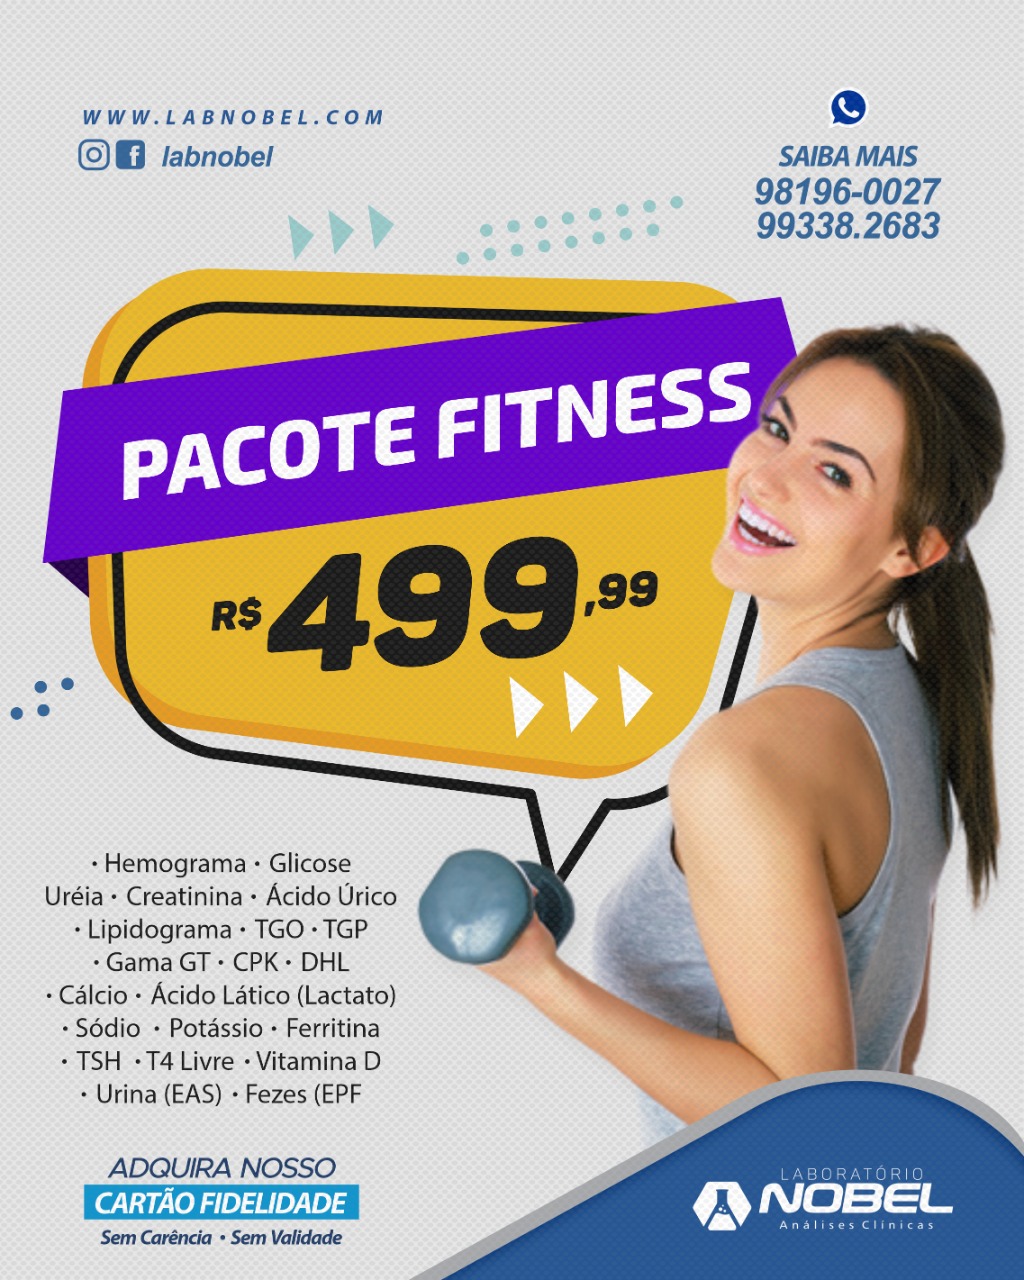 Pacote Fitness